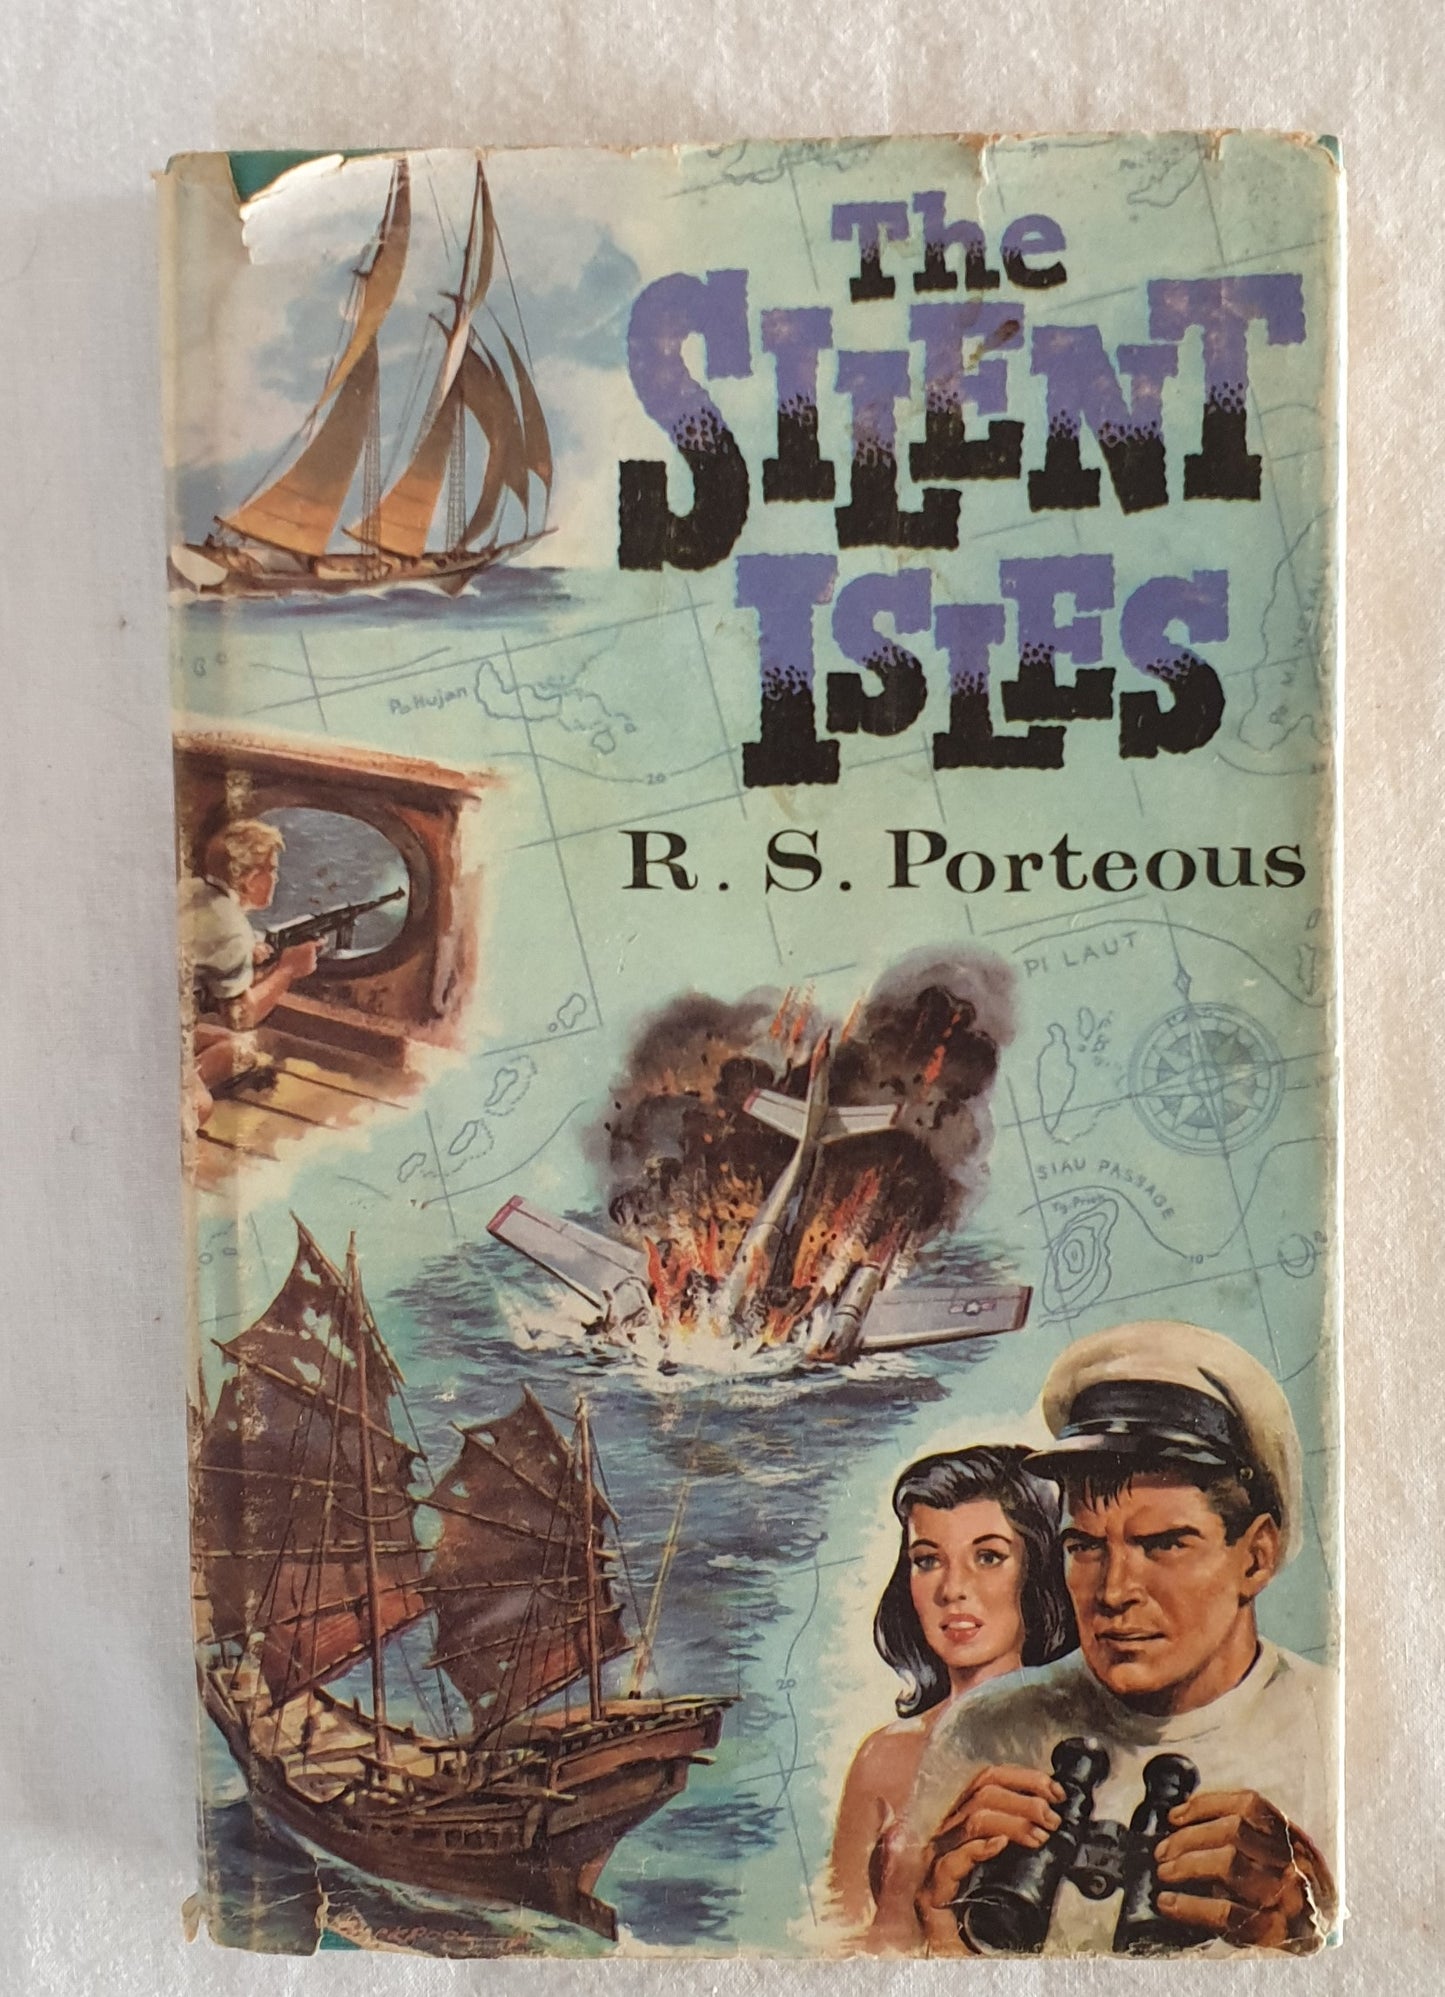 The Silent Isles by R. S. Porteous